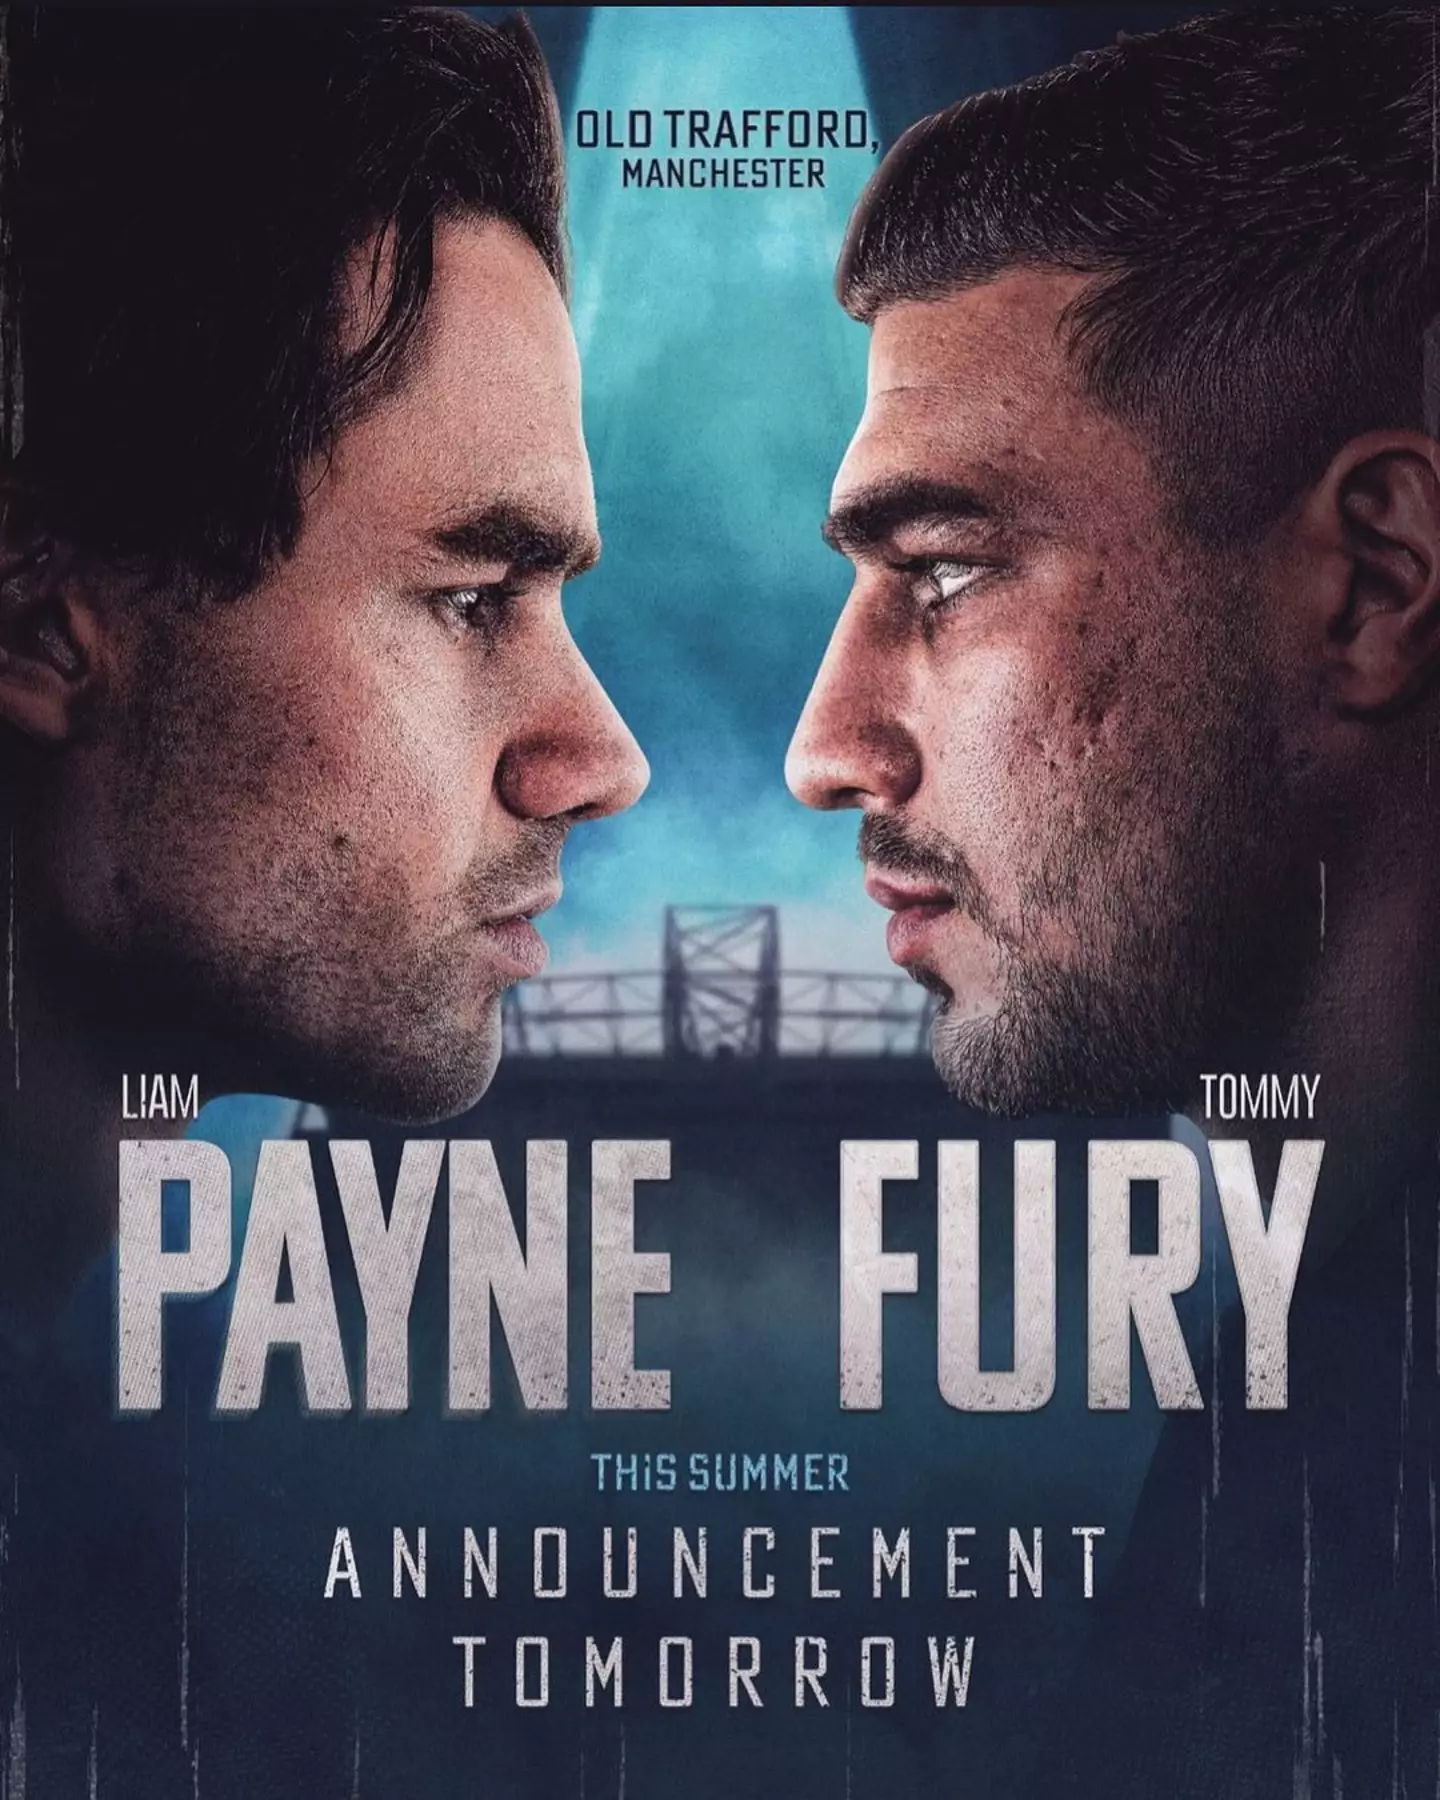 Liam Payne and Tommy Fury teased a big announcement involving Old Trafford.